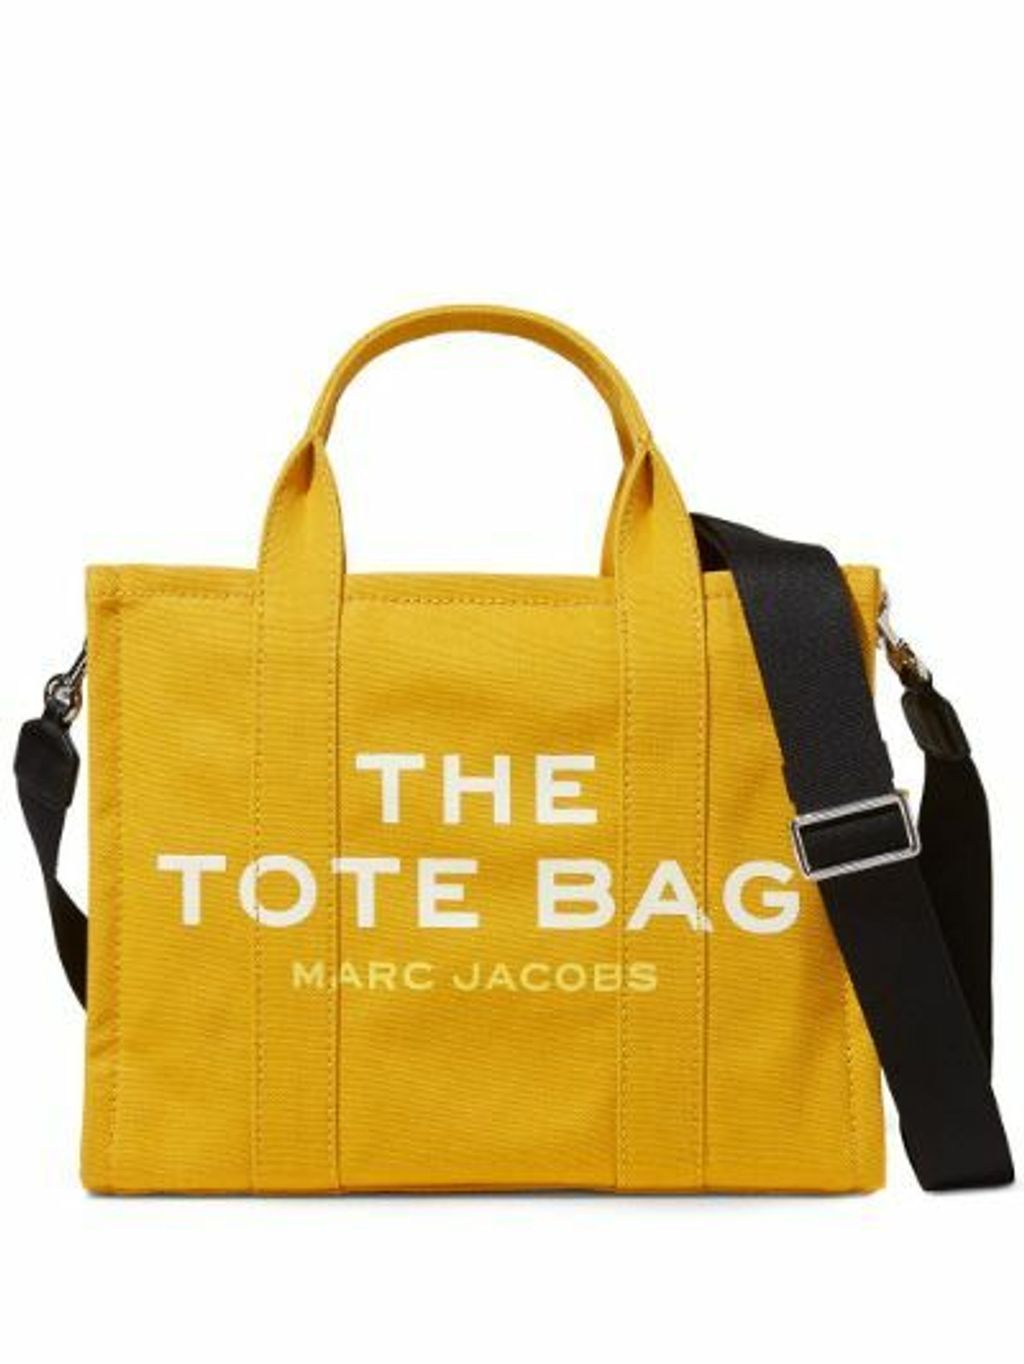 marc-jacobs-the-small-traveler-tote-bag_15970743_30348592_400.jpg